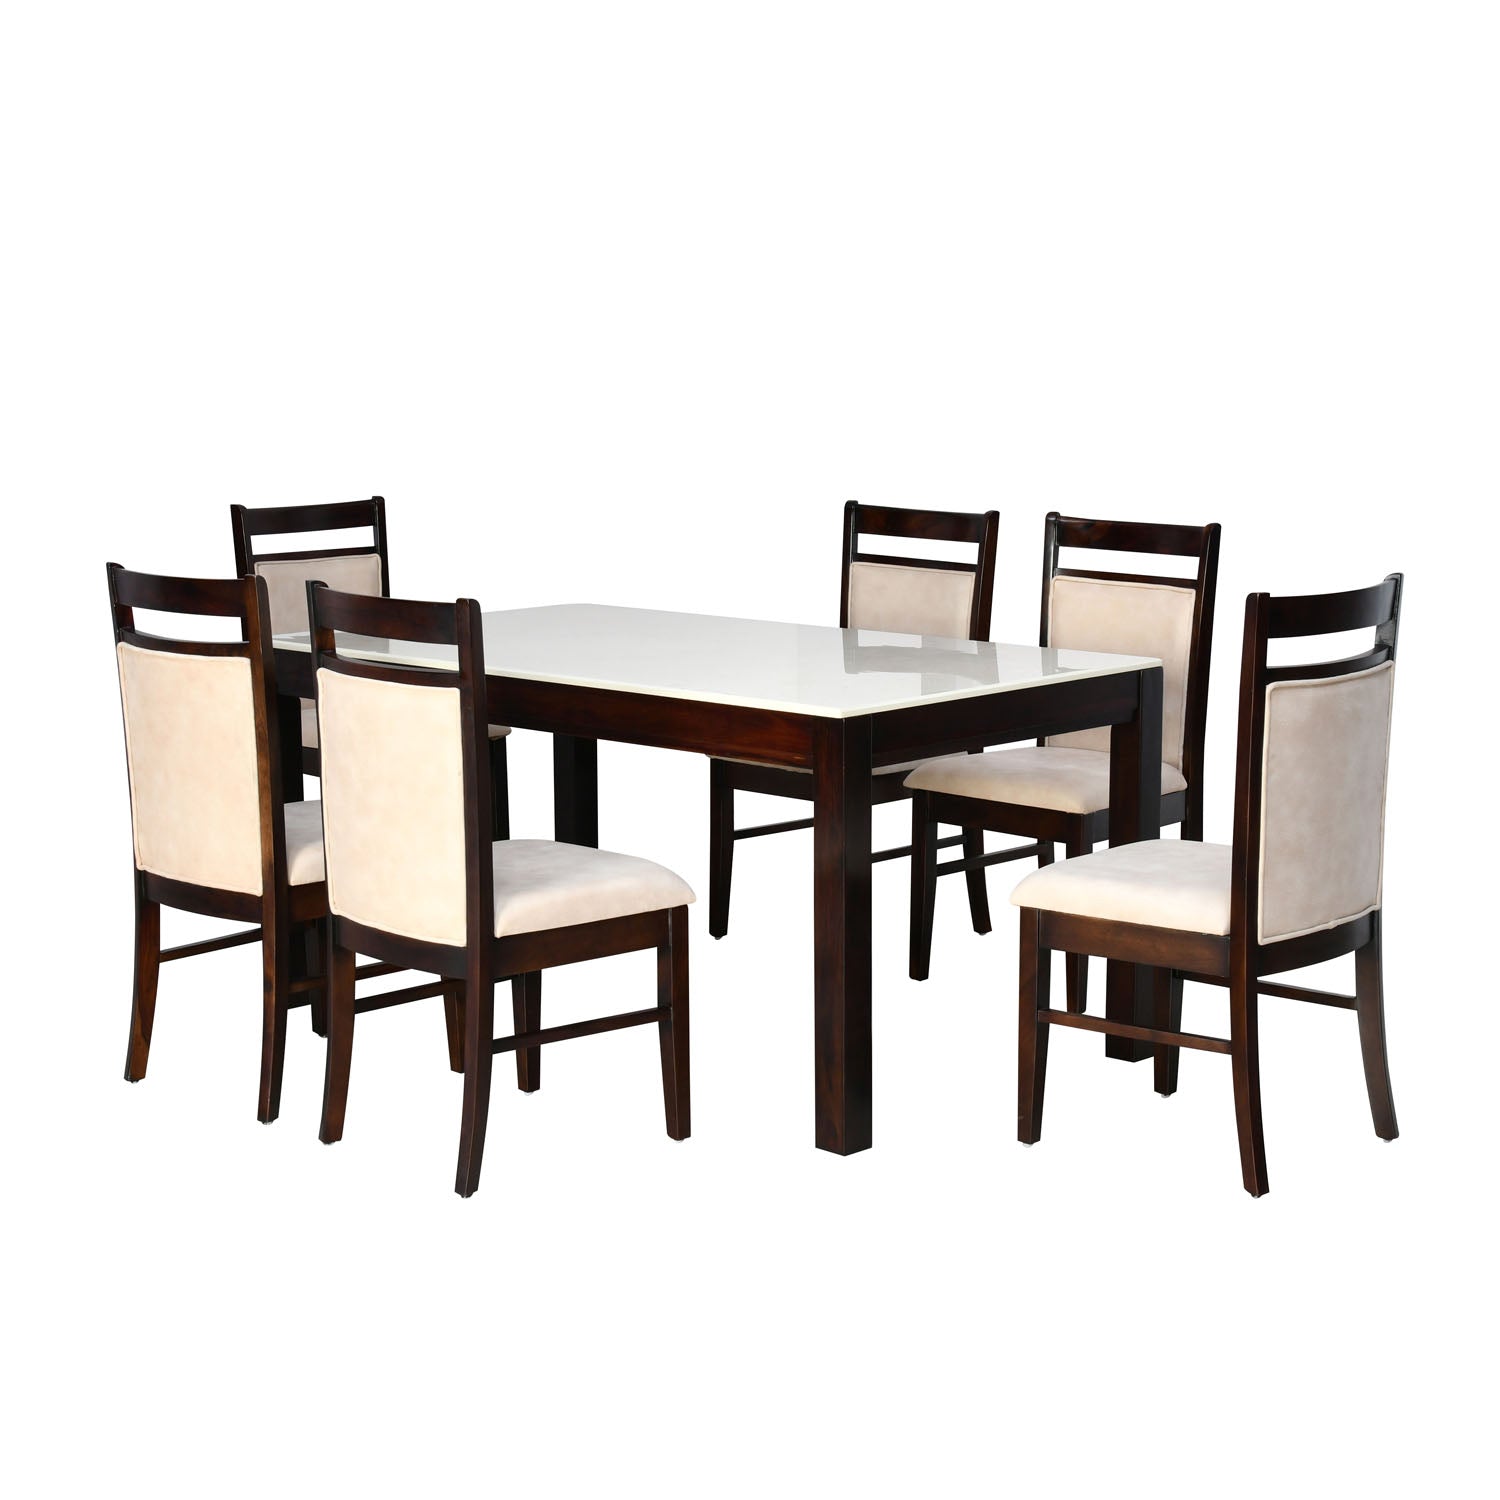 Pedro Ceramic Stone Top Solid Wood 6 Seater Dining Set With Chairs in  Beige Finish